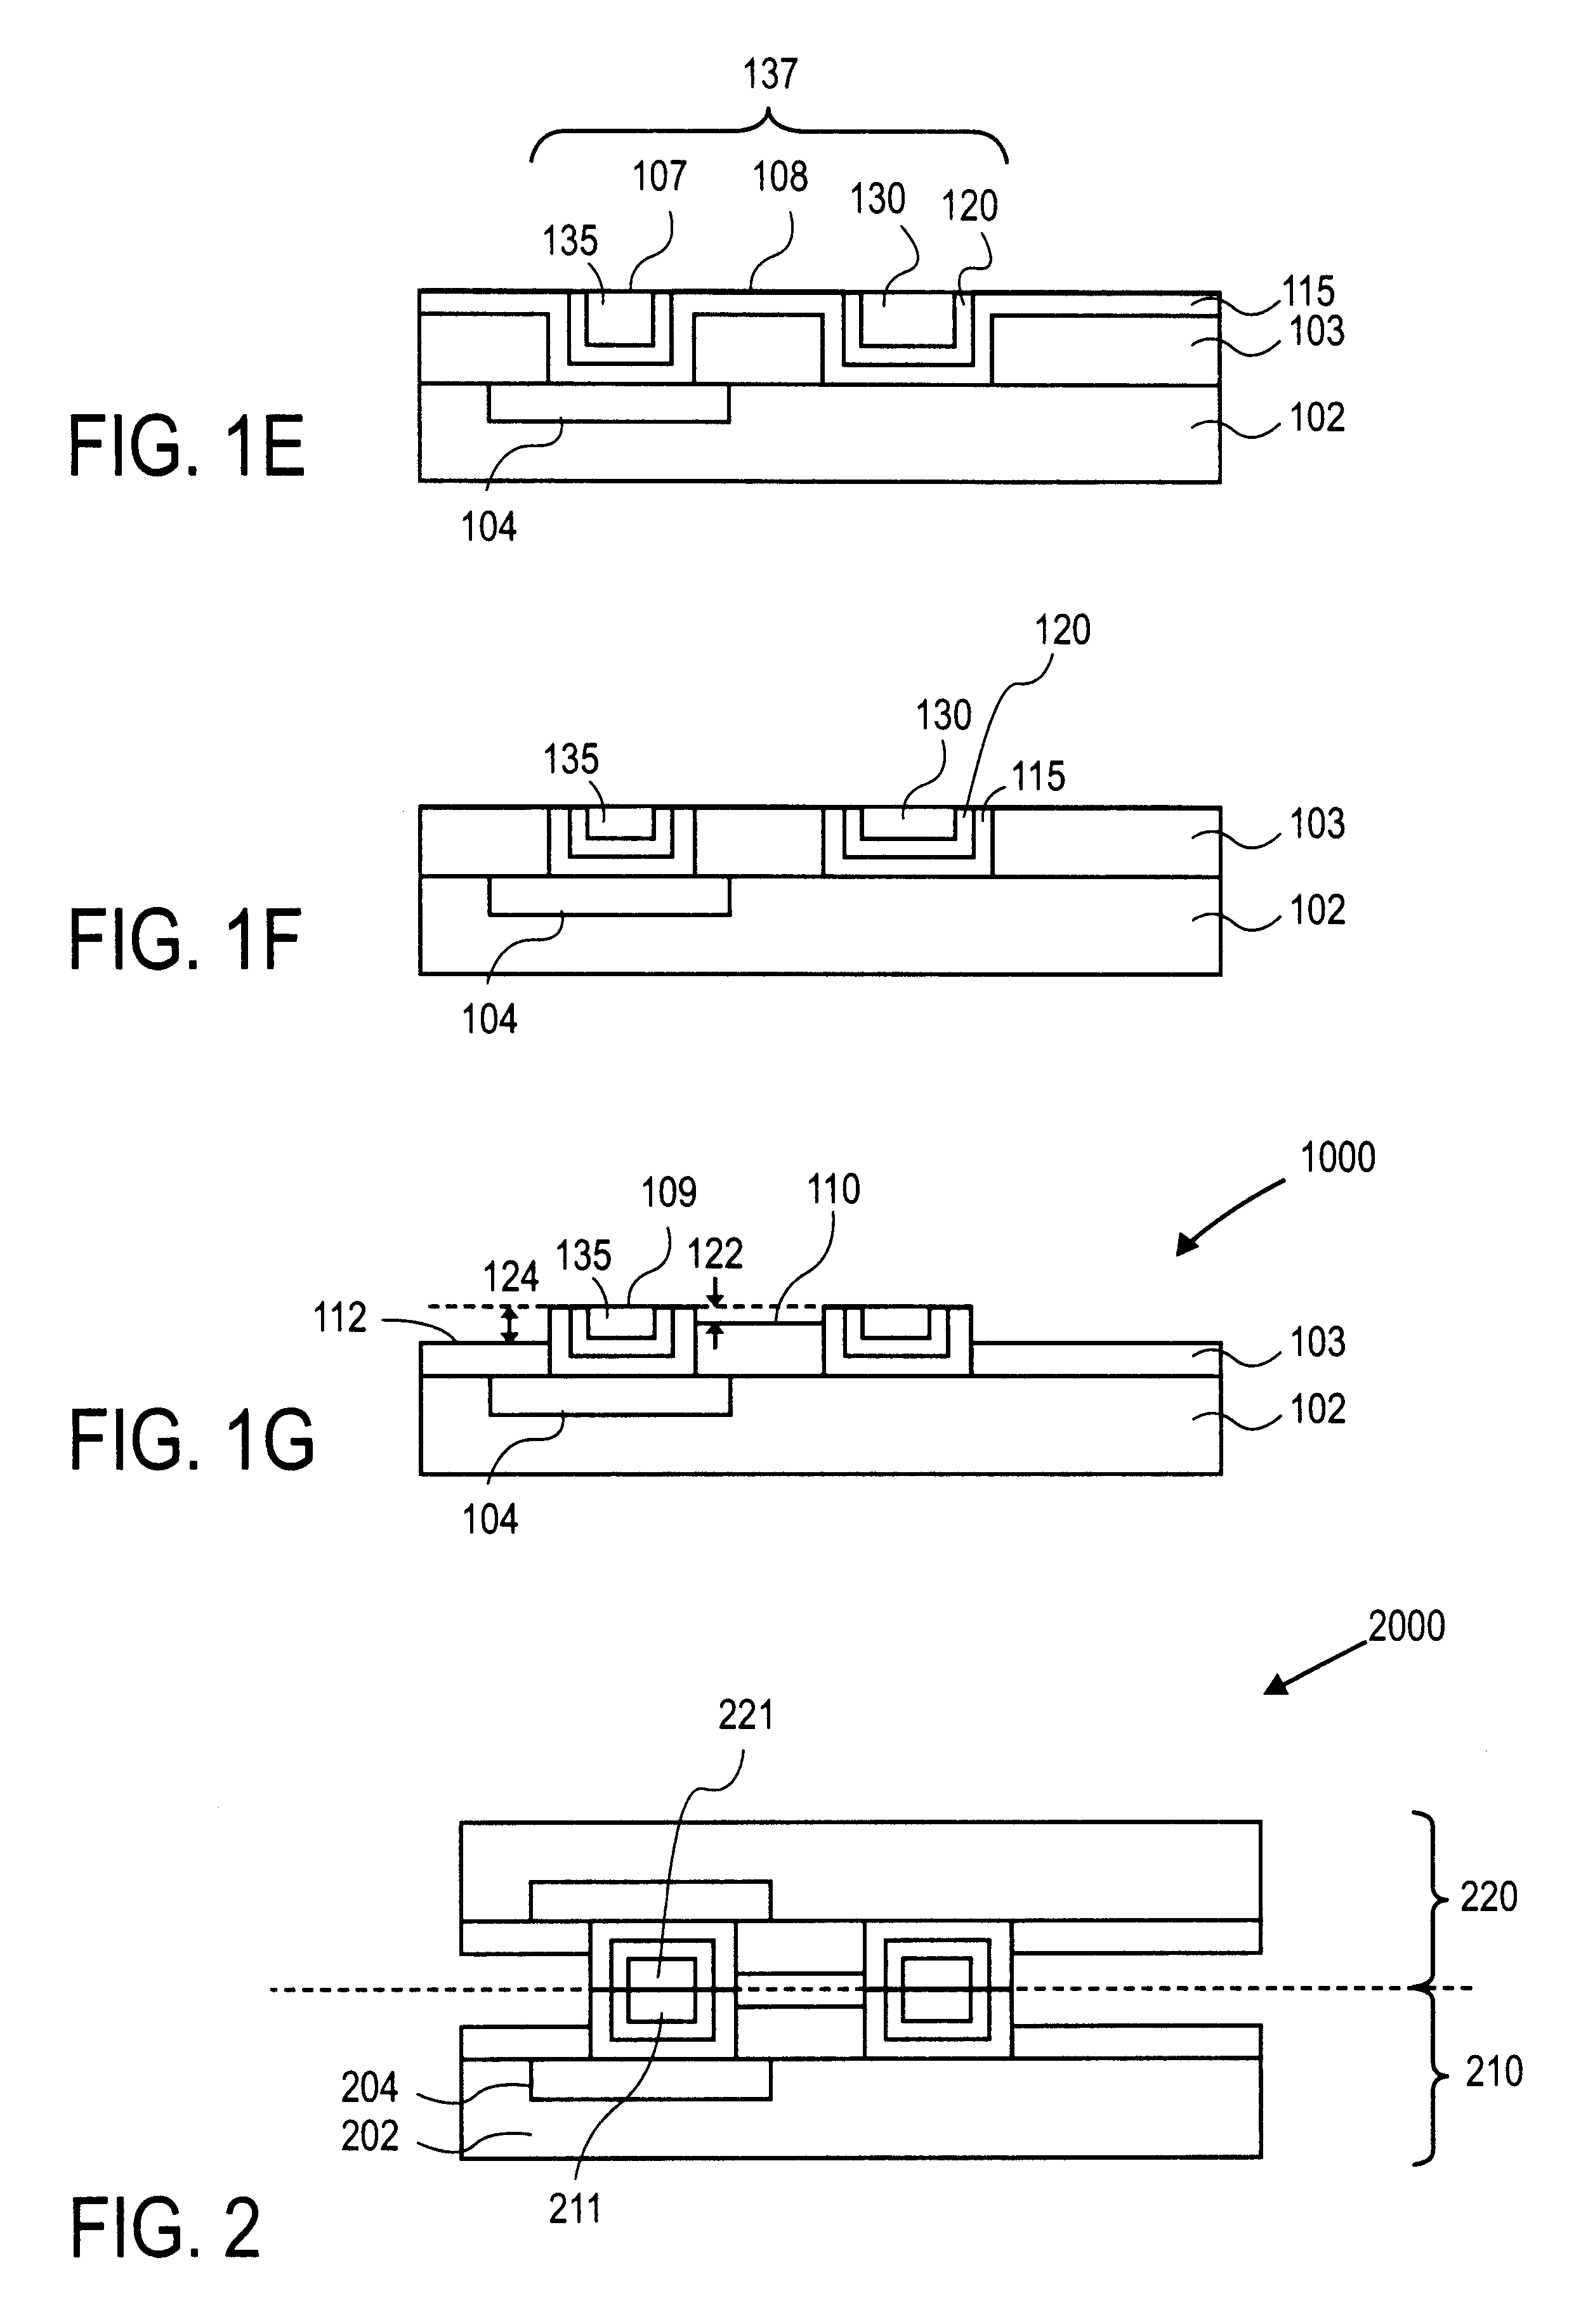 Method of forming a raised contact for a substrate